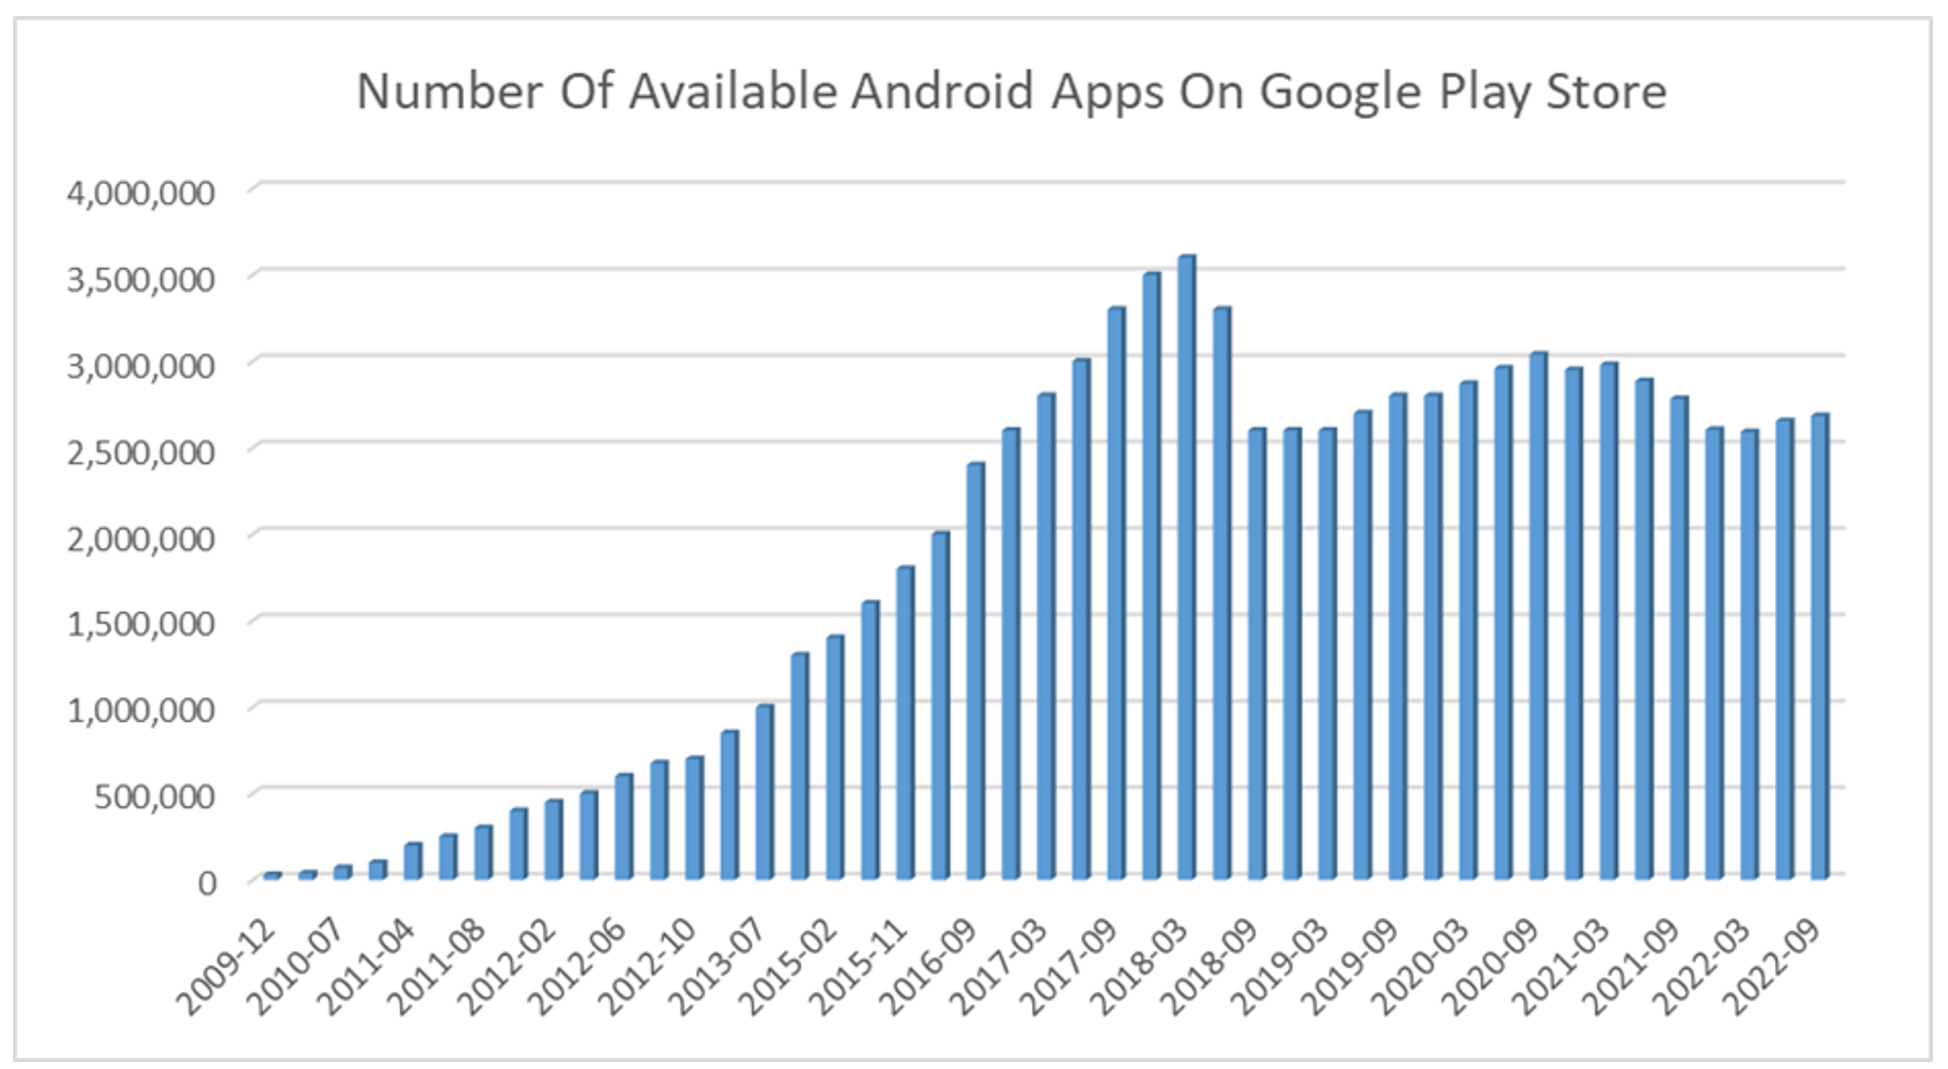 growth of available apps in the Google Play Store